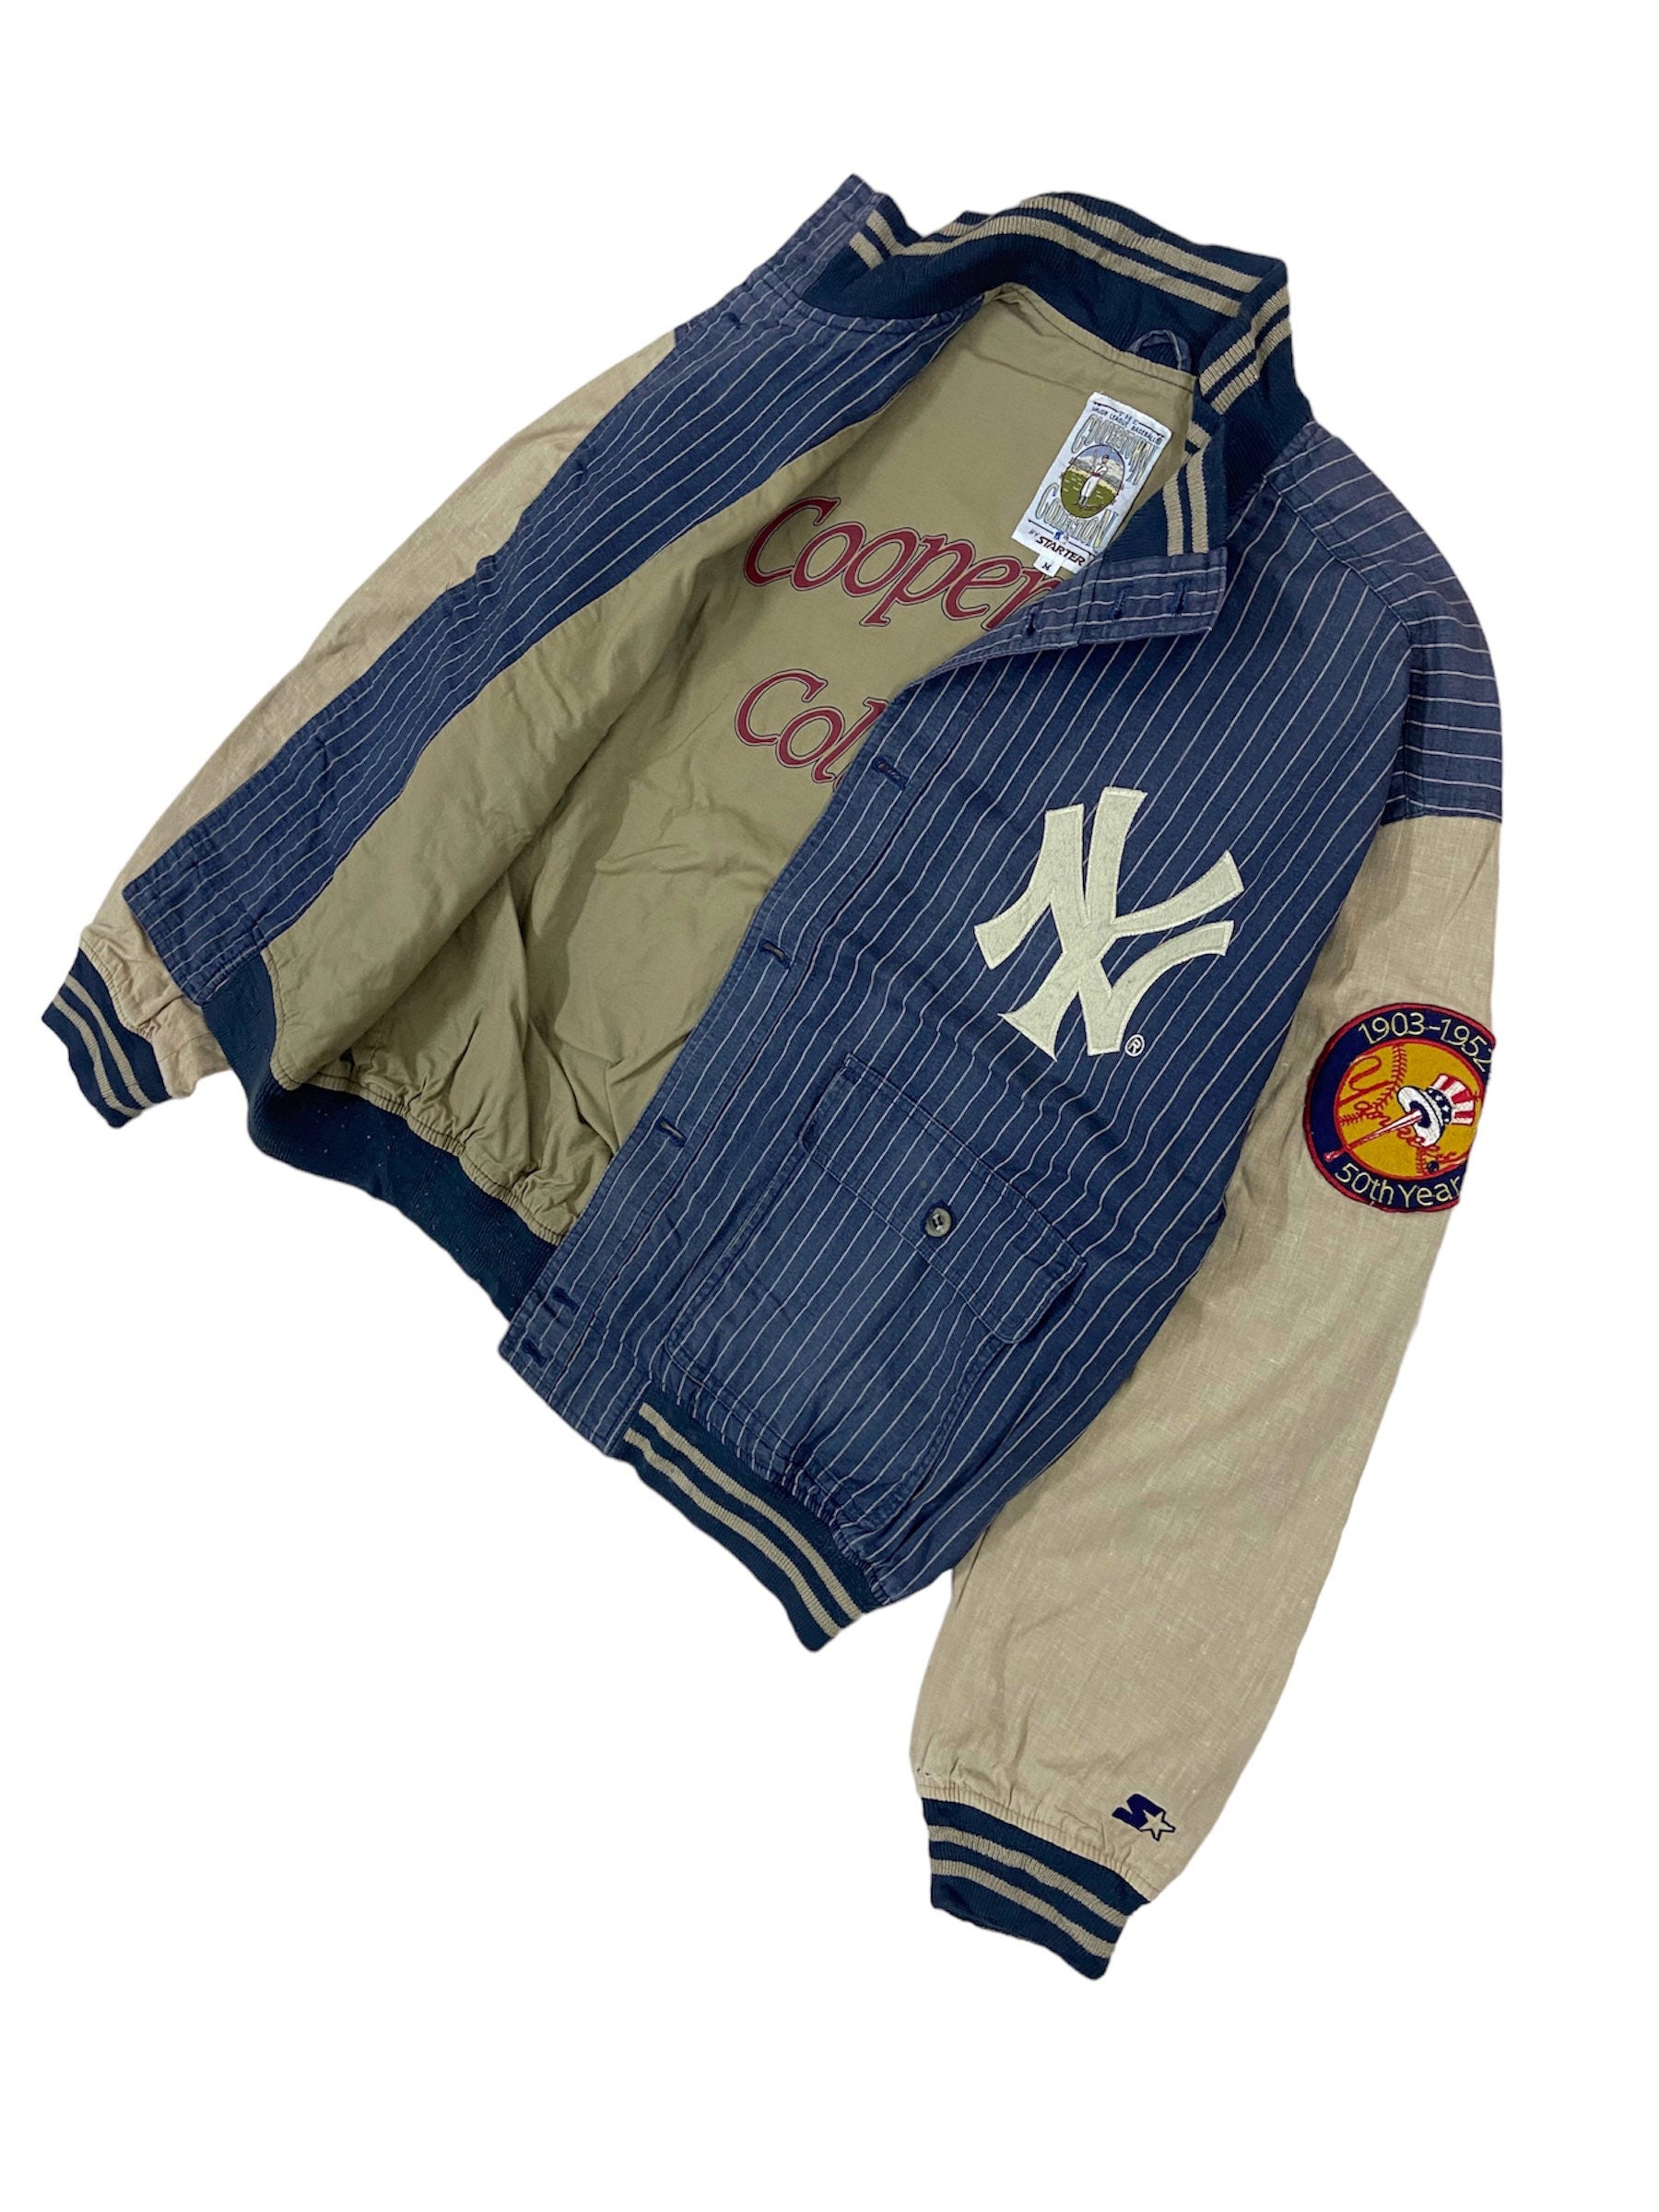 Mitchell & Ness, Jackets & Coats, New York Yankees Blue Baseball Jacket  Cooperstown Collection Mitchell Ness M